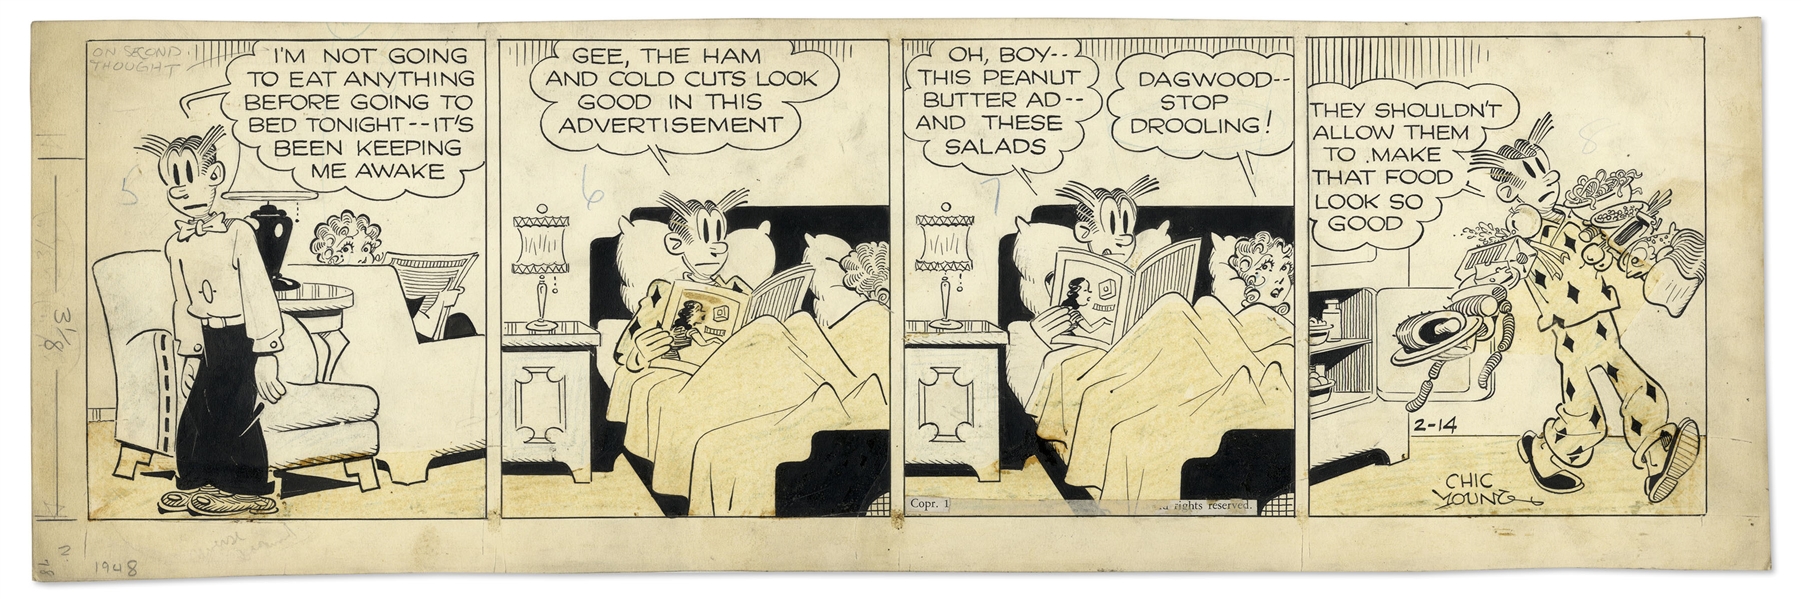 Chic Young Hand-Drawn ''Blondie'' Comic Strip From 1948 Titled ''Pin-Ups Pin Down Papa!'' -- Dagwood Makes One of His Infamous Midnight Food Runs